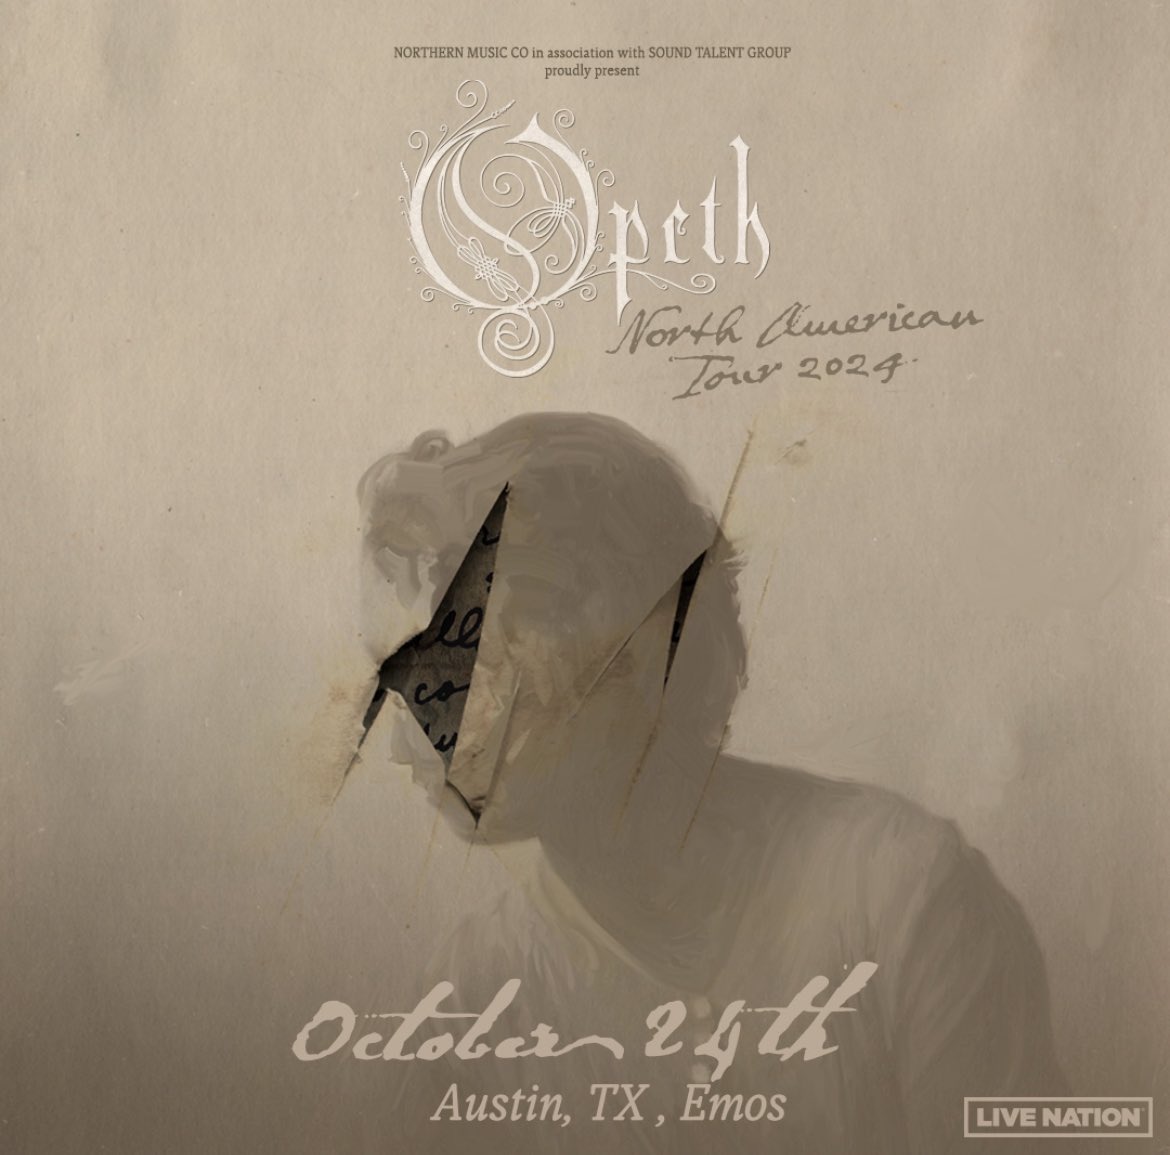 Opeth just announced North American tour dates and will take over @emosaustin on Thursday, October 24th! 🟤 Artist Presale: Tues 4/23 @ 11am 🟤 LN & TM Presales: Tues 4/23 @ 1pm 🟤 Spotify Presale: Wed 4/24 @ 1pm 🟤 Public Onsale: Fri 4/26 @ 10am atxconcert.com